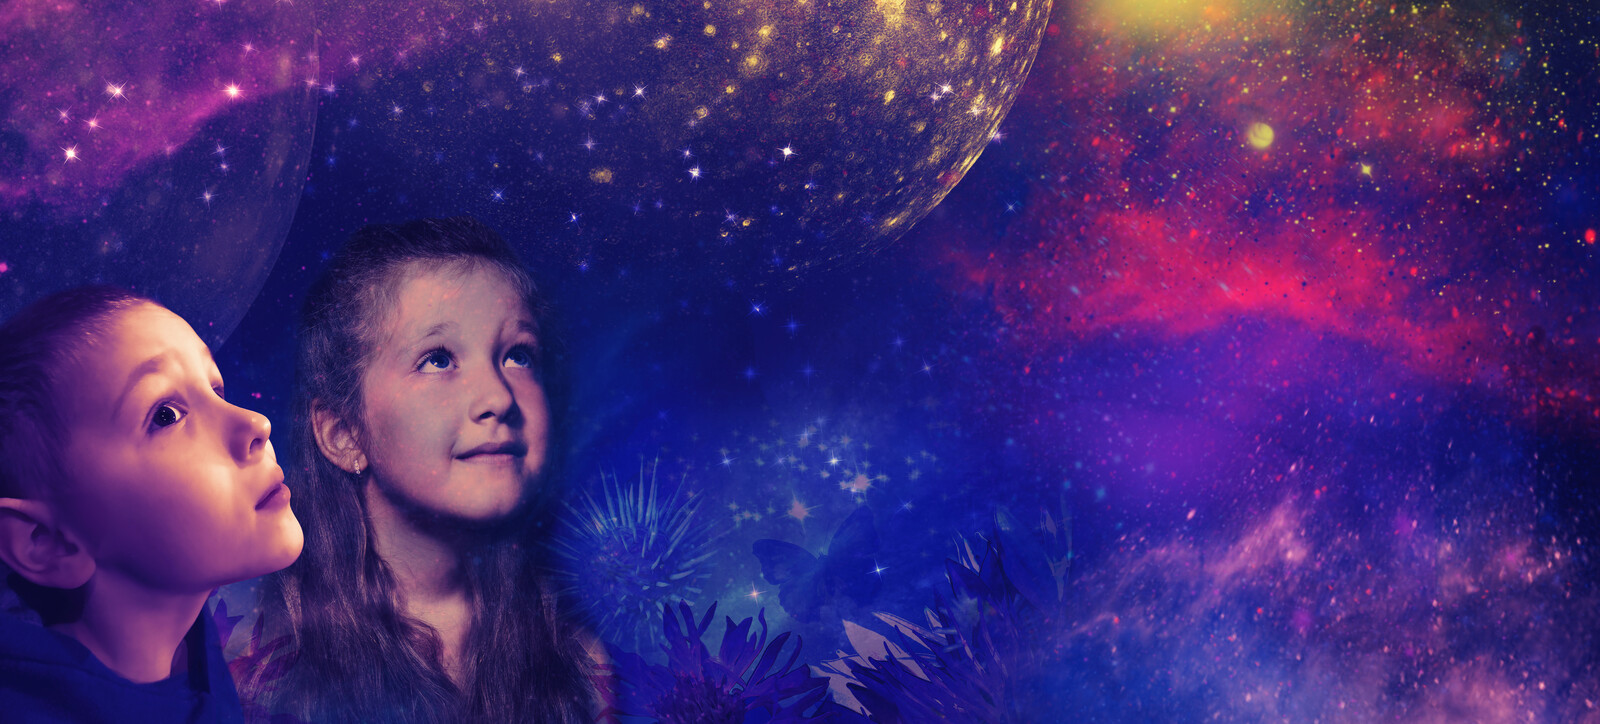 The Universe Through The Eyes Of Children